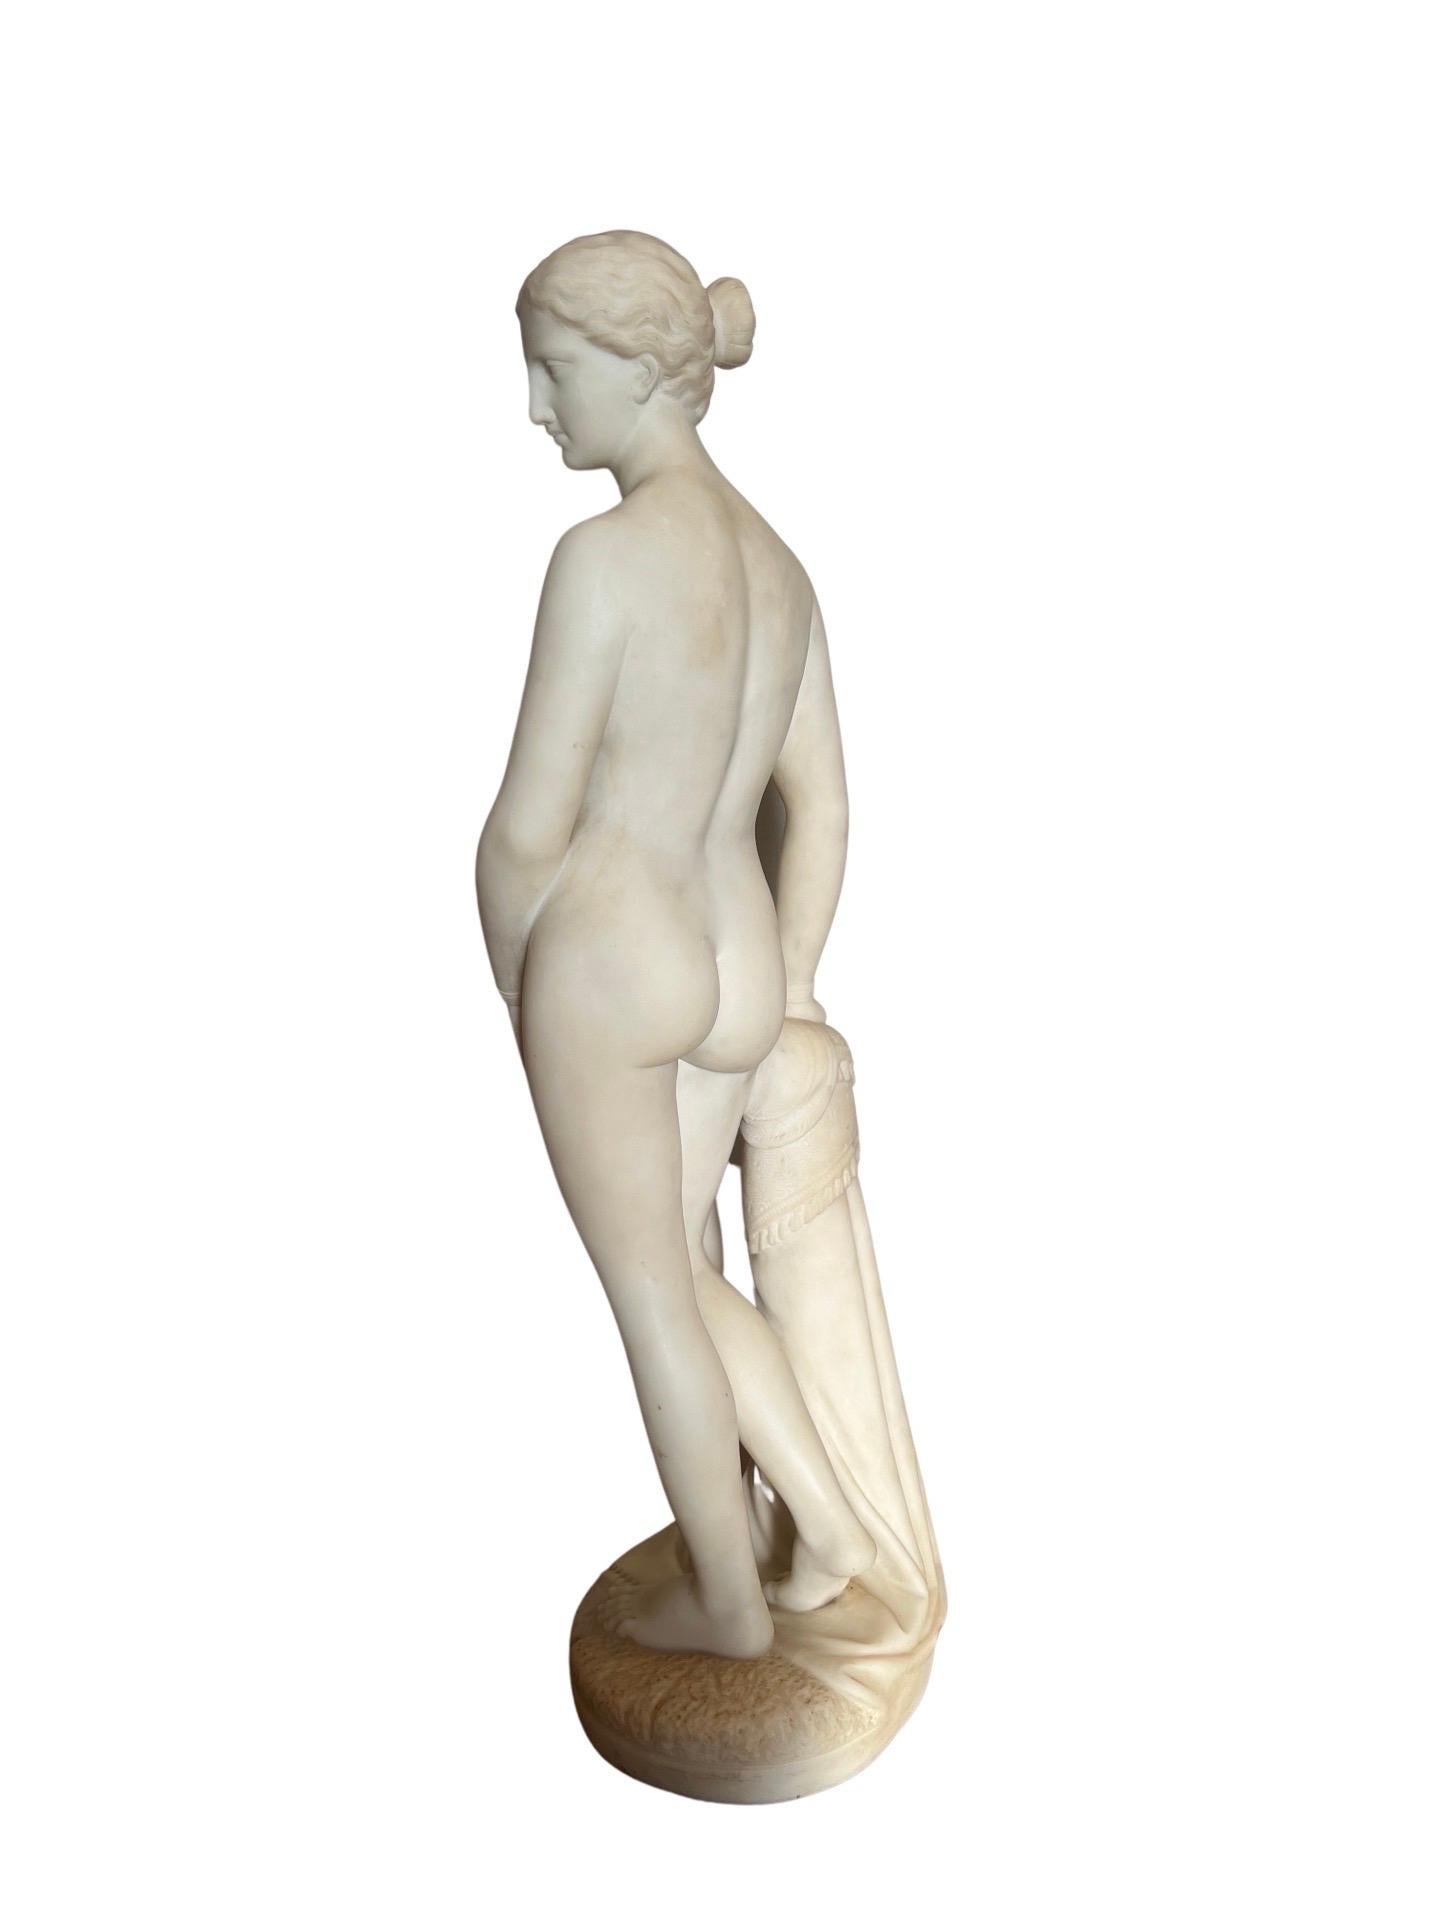 After Hiram Powers, Grand Tour Marble Sculpture of “the Greek Slave” For Sale 2